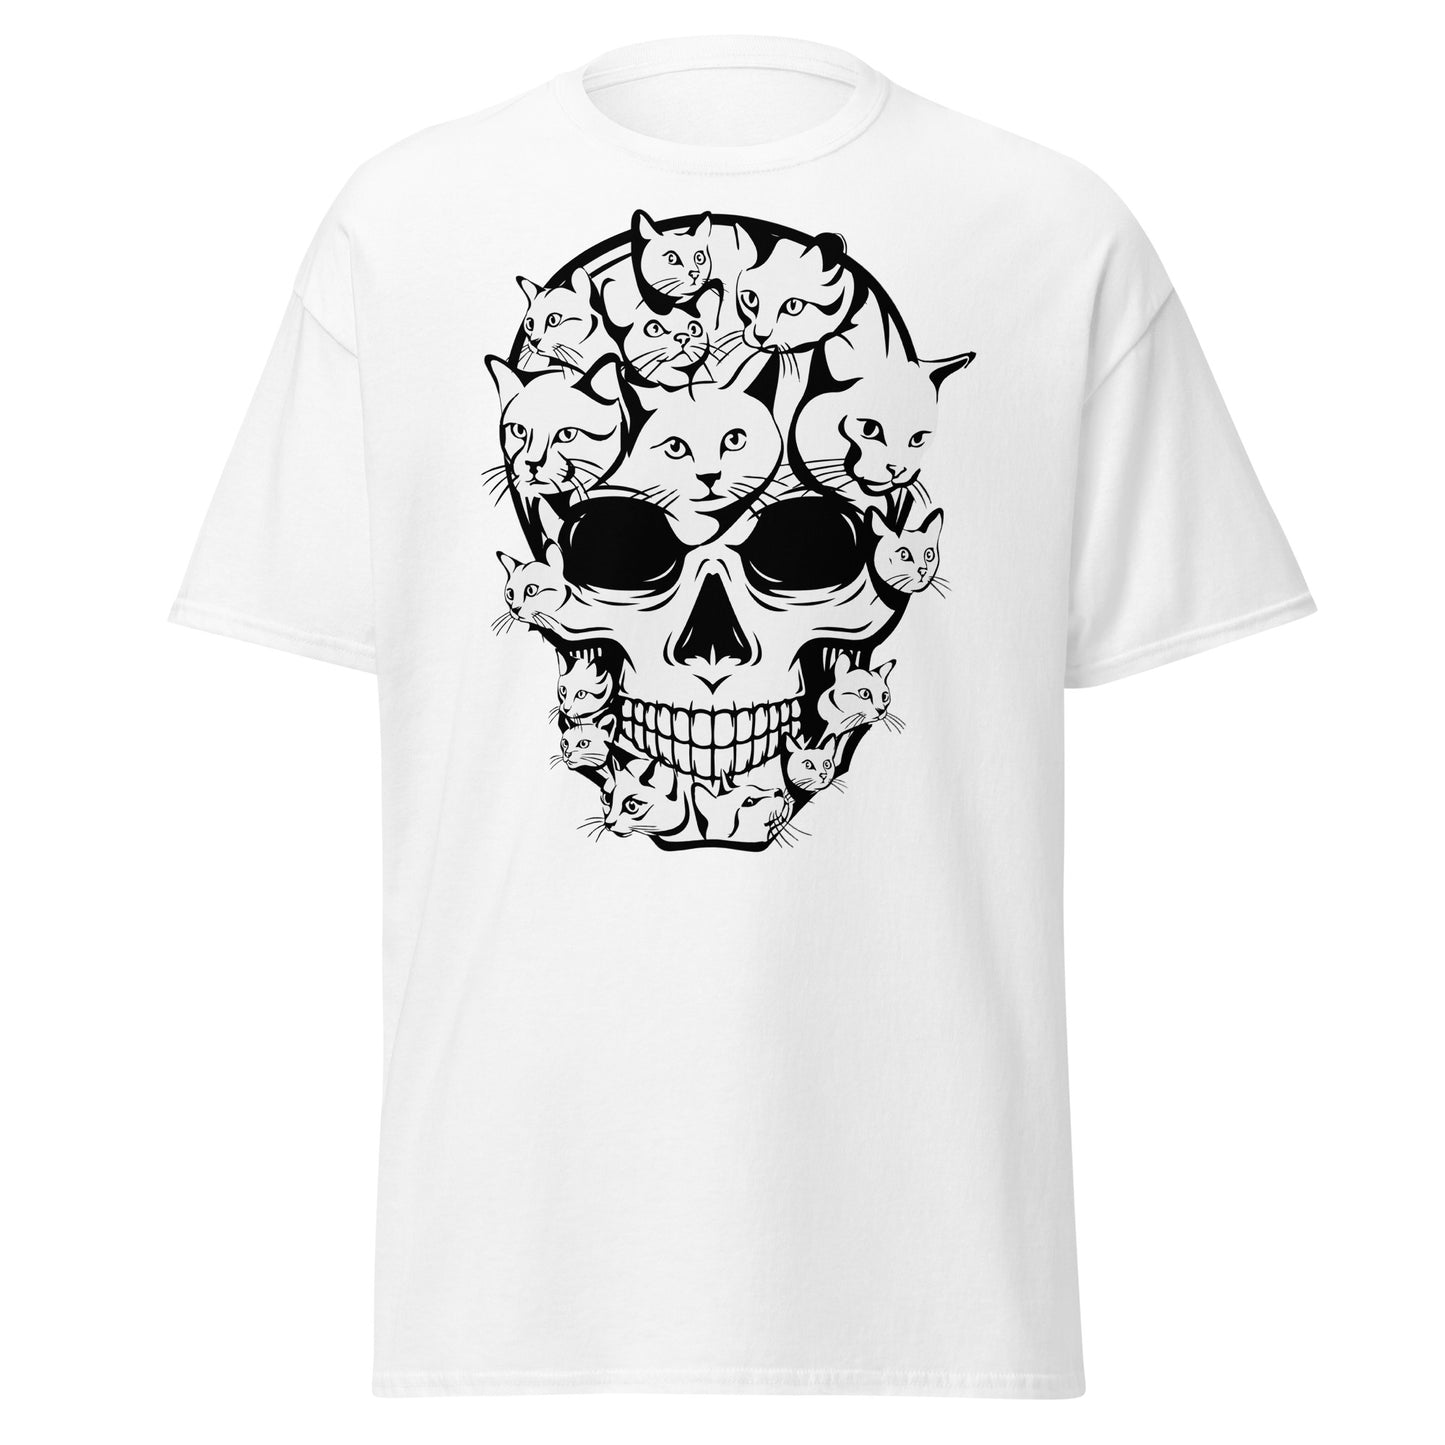 Whiskers and Chills: Funny Cat Skull T-Shirt - Embrace Halloween Vibes